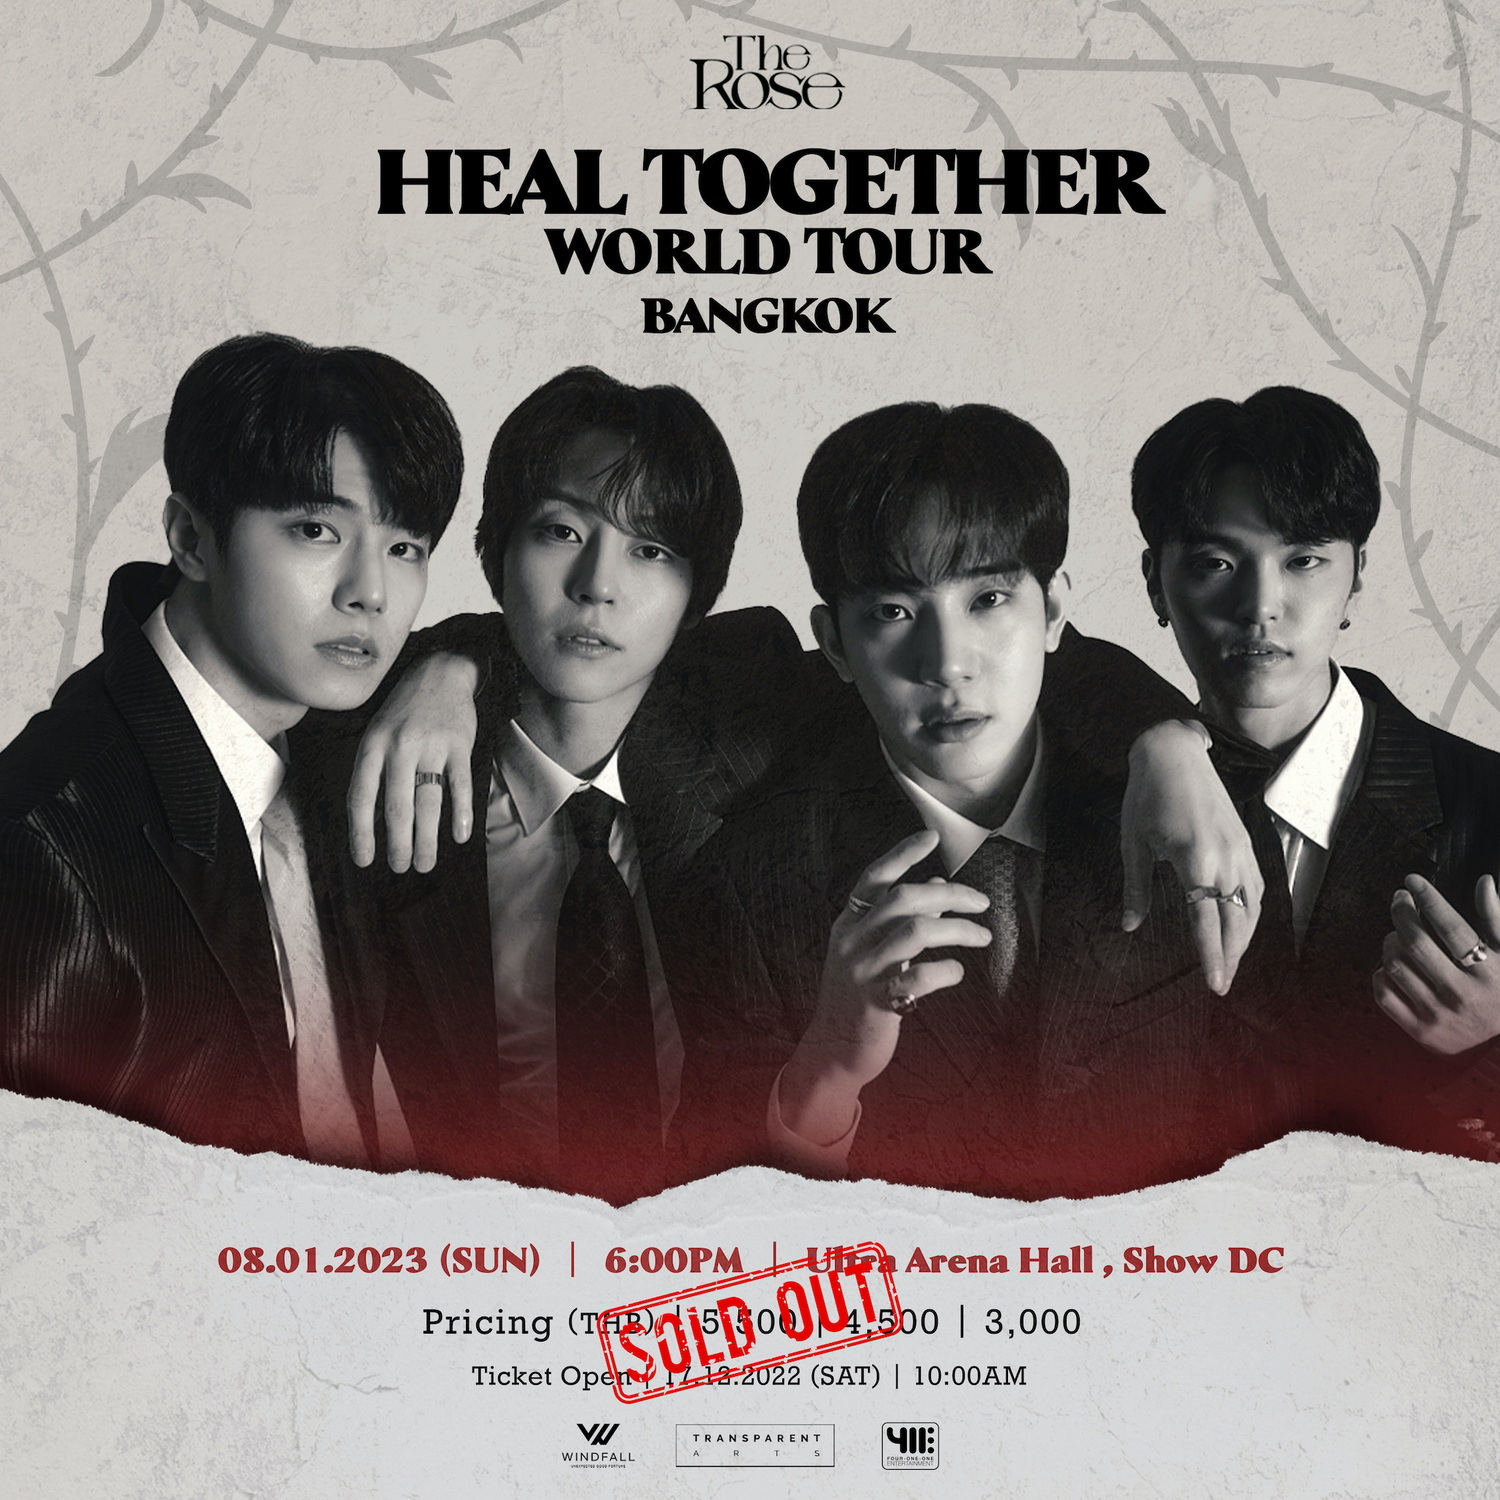 The Rose [HEAL TOGETHER] WORLD TOUR IN BANGKOK - SOLD OUT